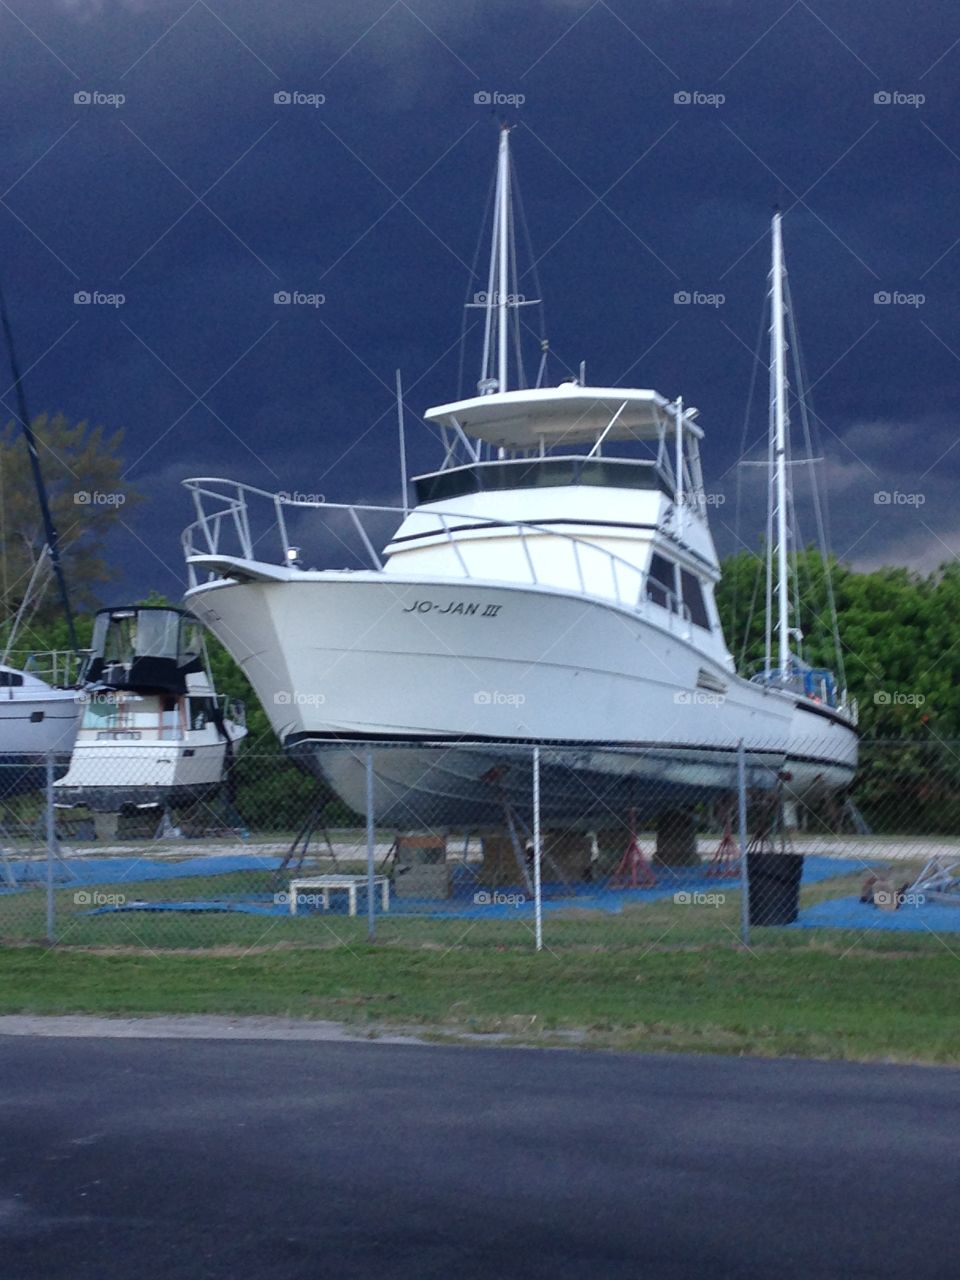 Boat storm. Waiting for the storm at the marina